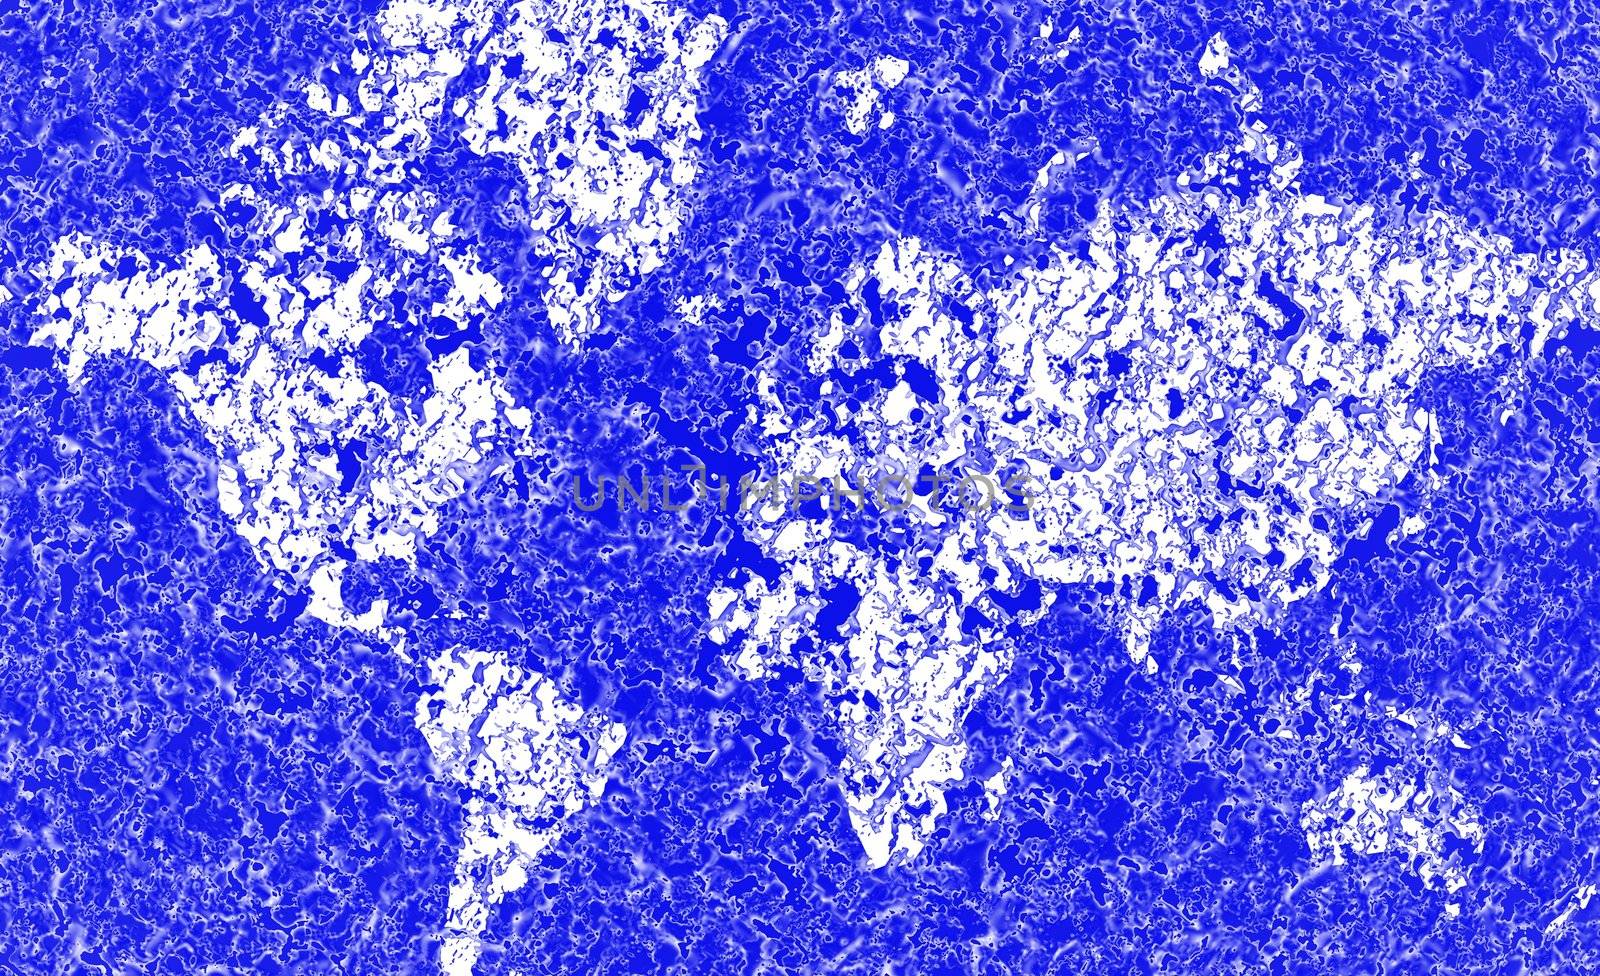 An abstract map of the world with the appearance of being seen through an ice covered window.